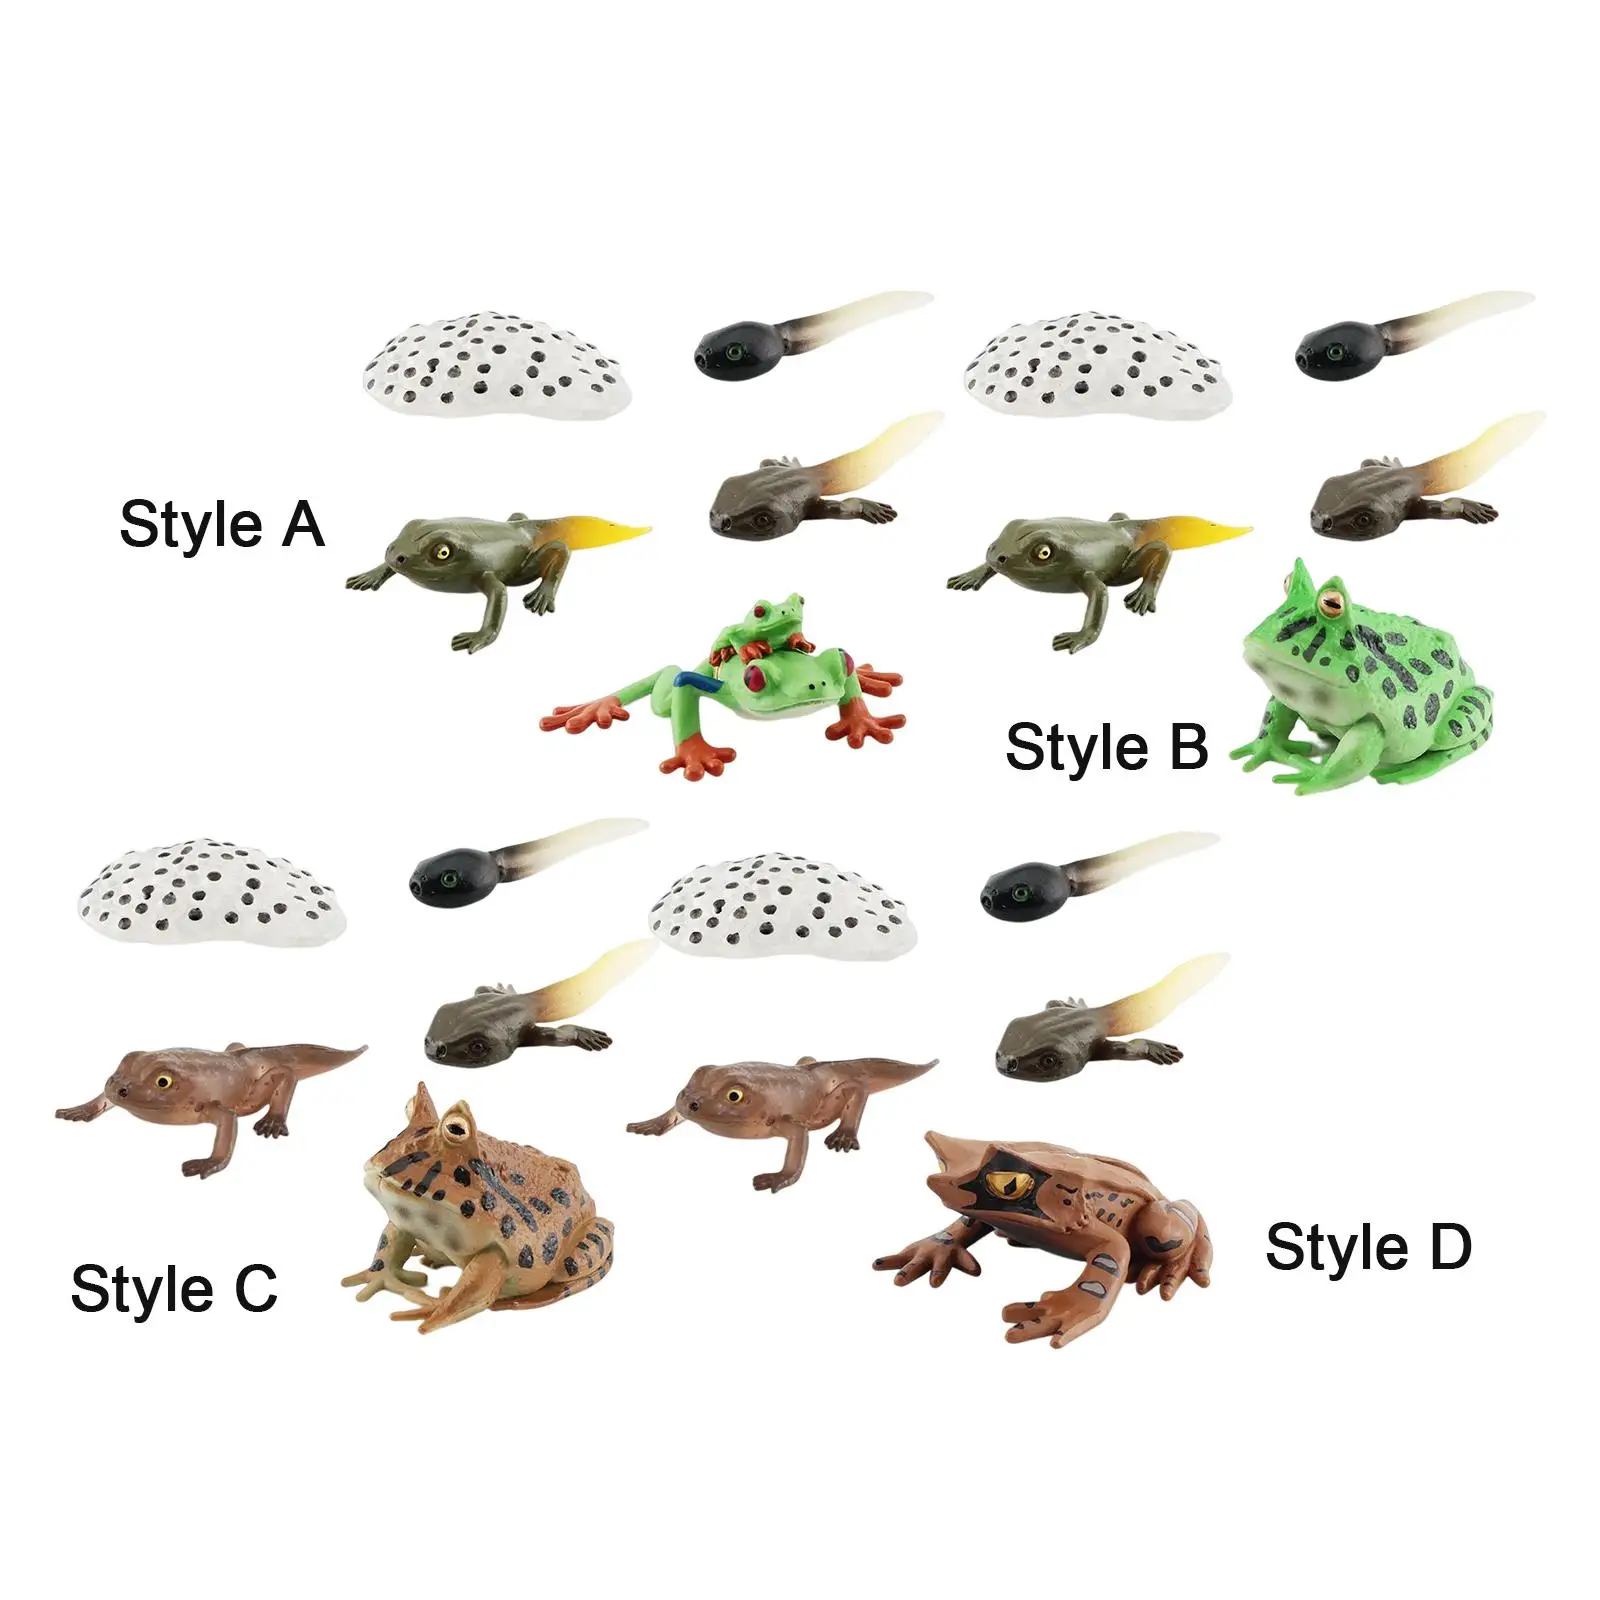 Life Cycle Figurines Realistic Animal Figurines Playset Frogs Life Cycle Model for Children Toddlers Kids Teaching Materials